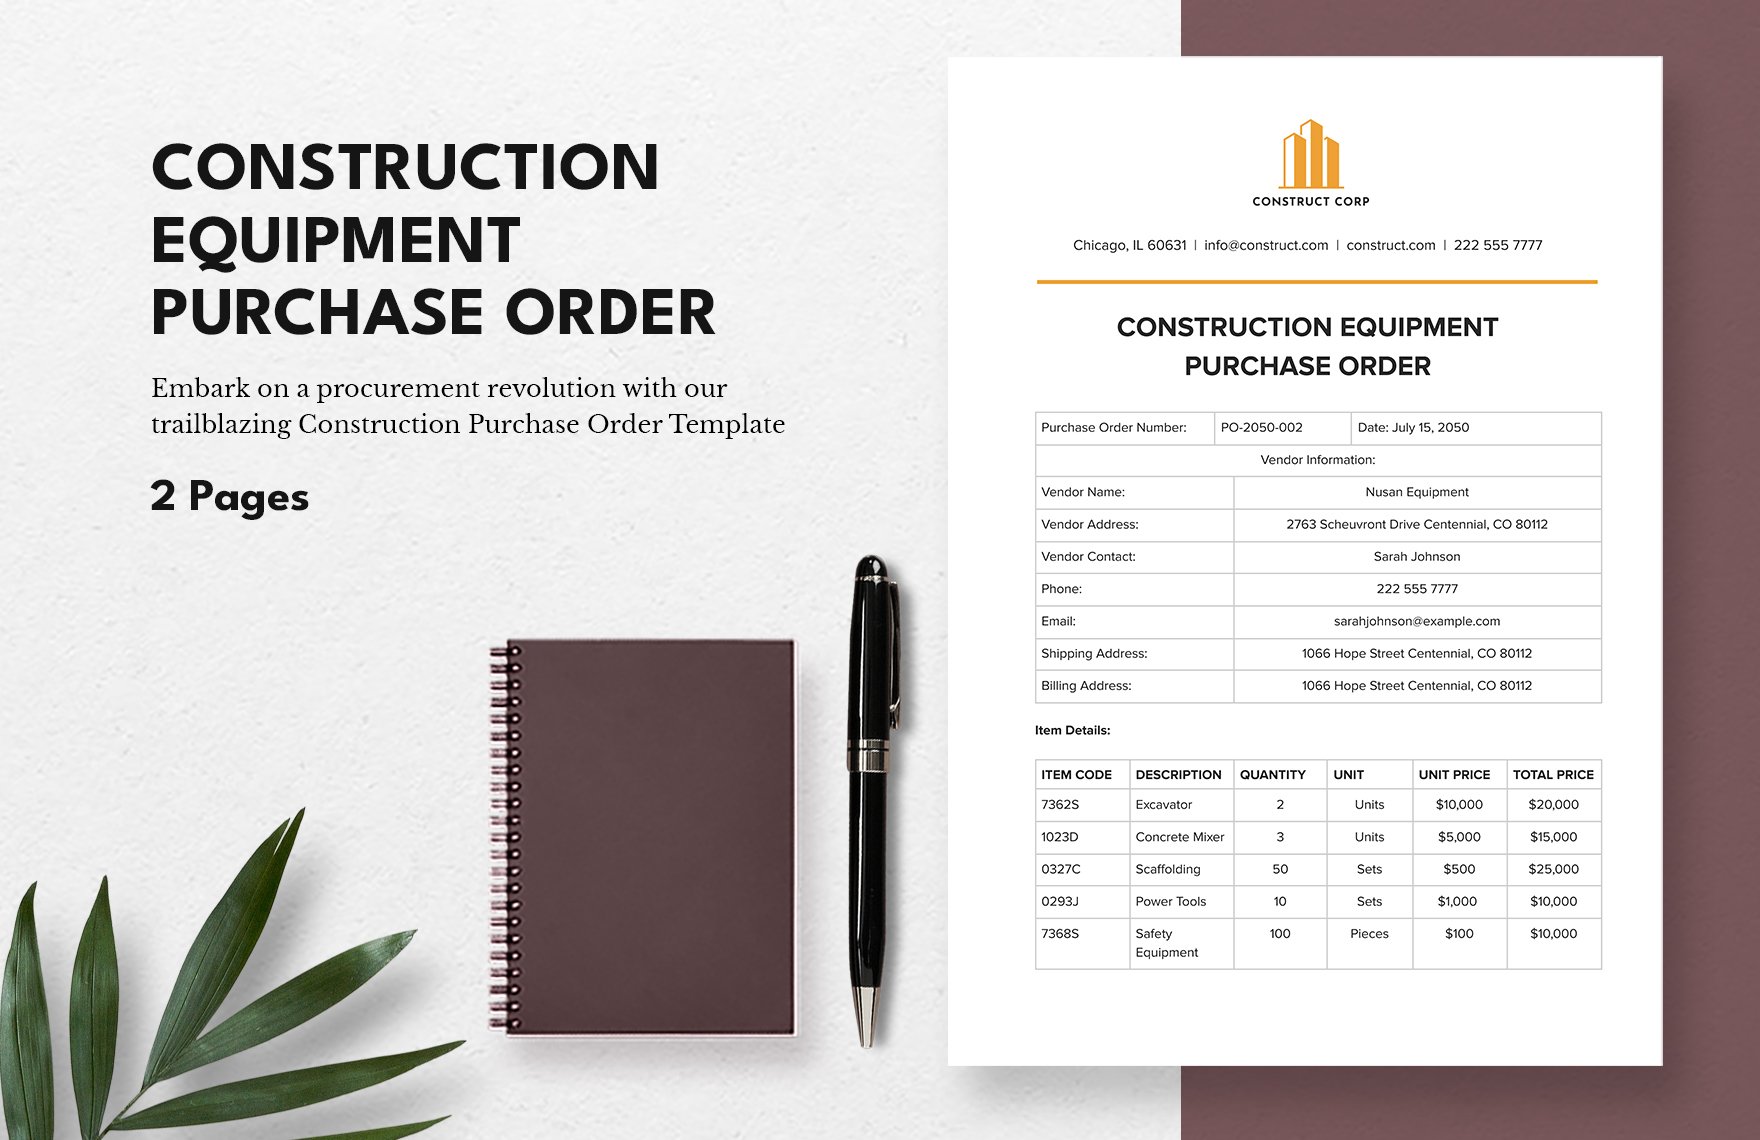 Construction Equipment Purchase Order